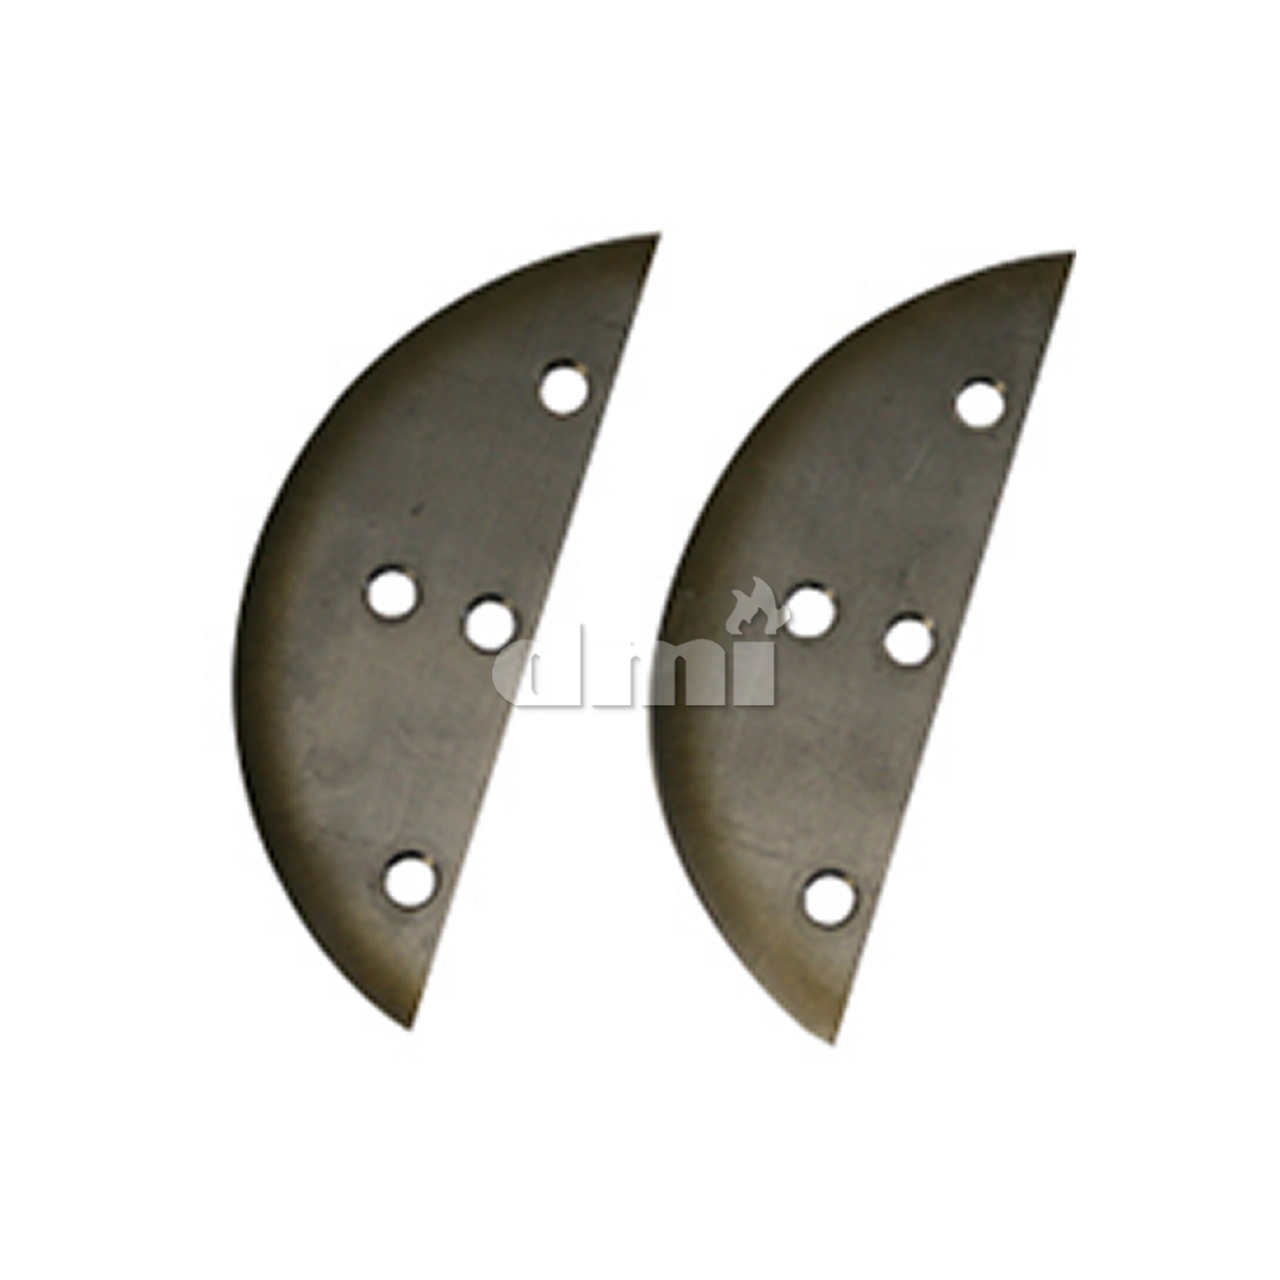 8560-1  Nemco Easy Slicer (N55200AN) Vegetable Cutter Replacement Blade Set, Adjustable Cut